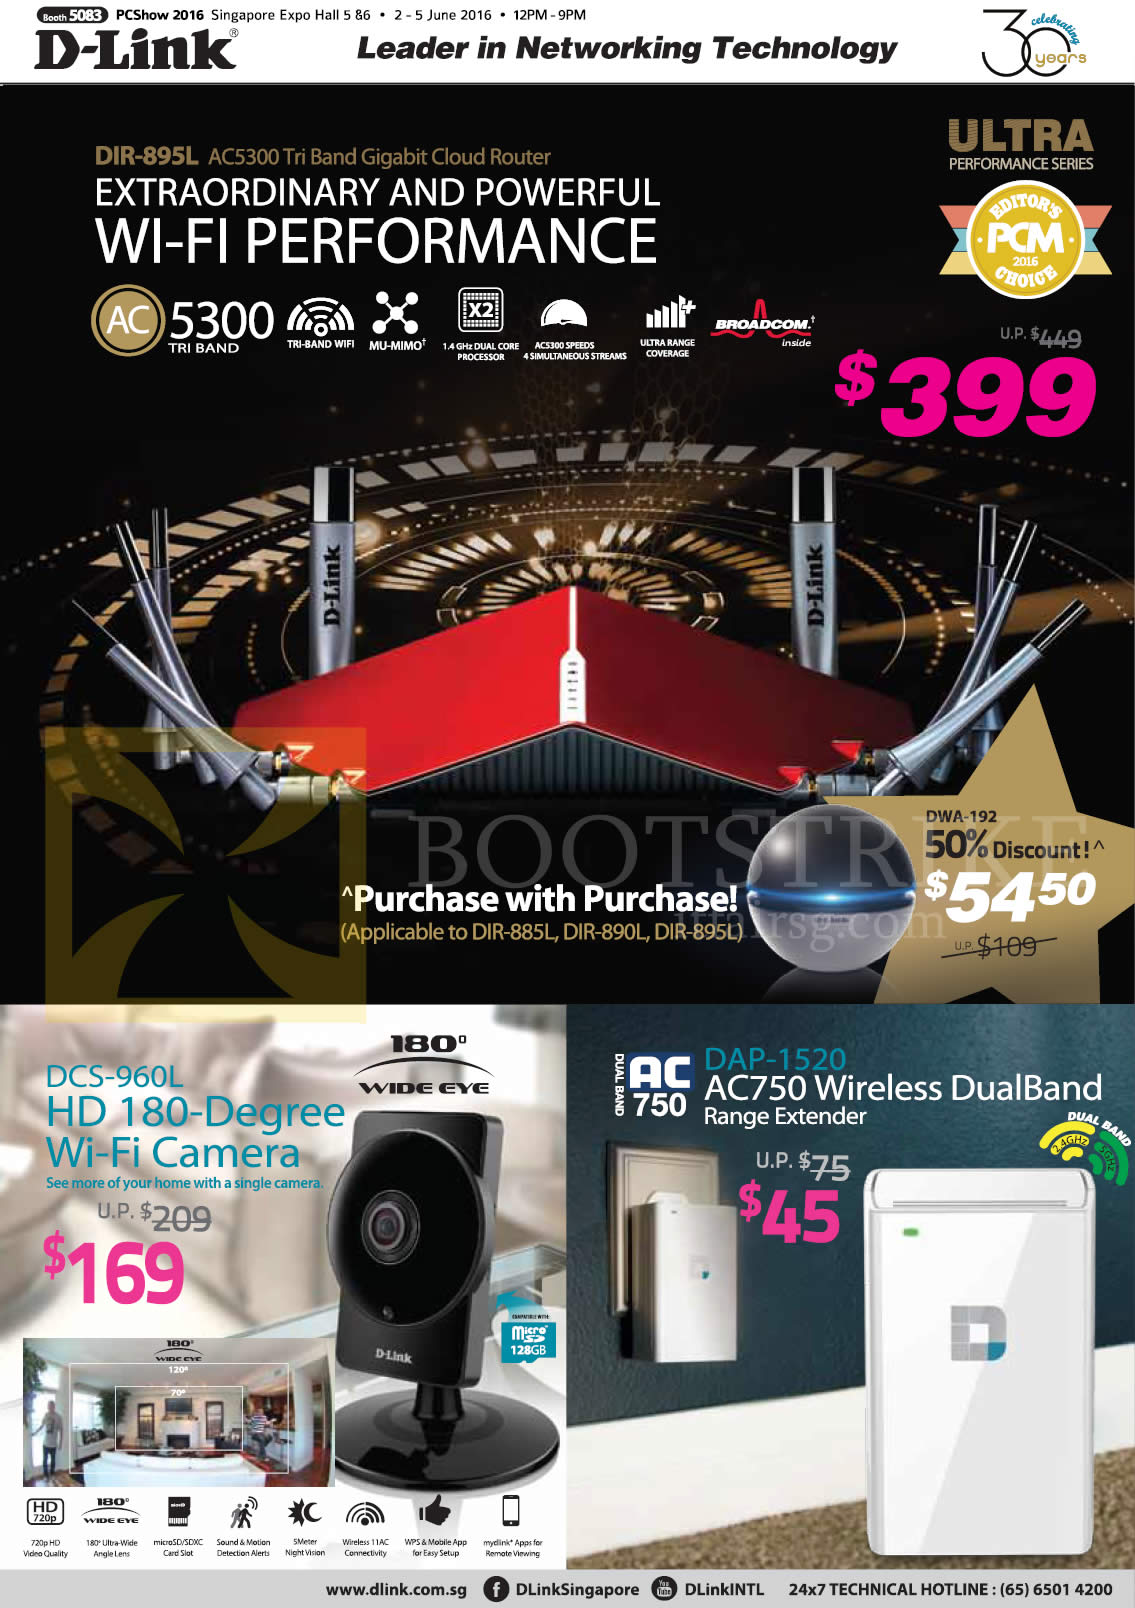 PC SHOW 2016 price list image brochure of D-Link Networking Router, Wifi Camera, Wireless DualBand Range Extender, DWA-192, DCS-960L, DAP-1520